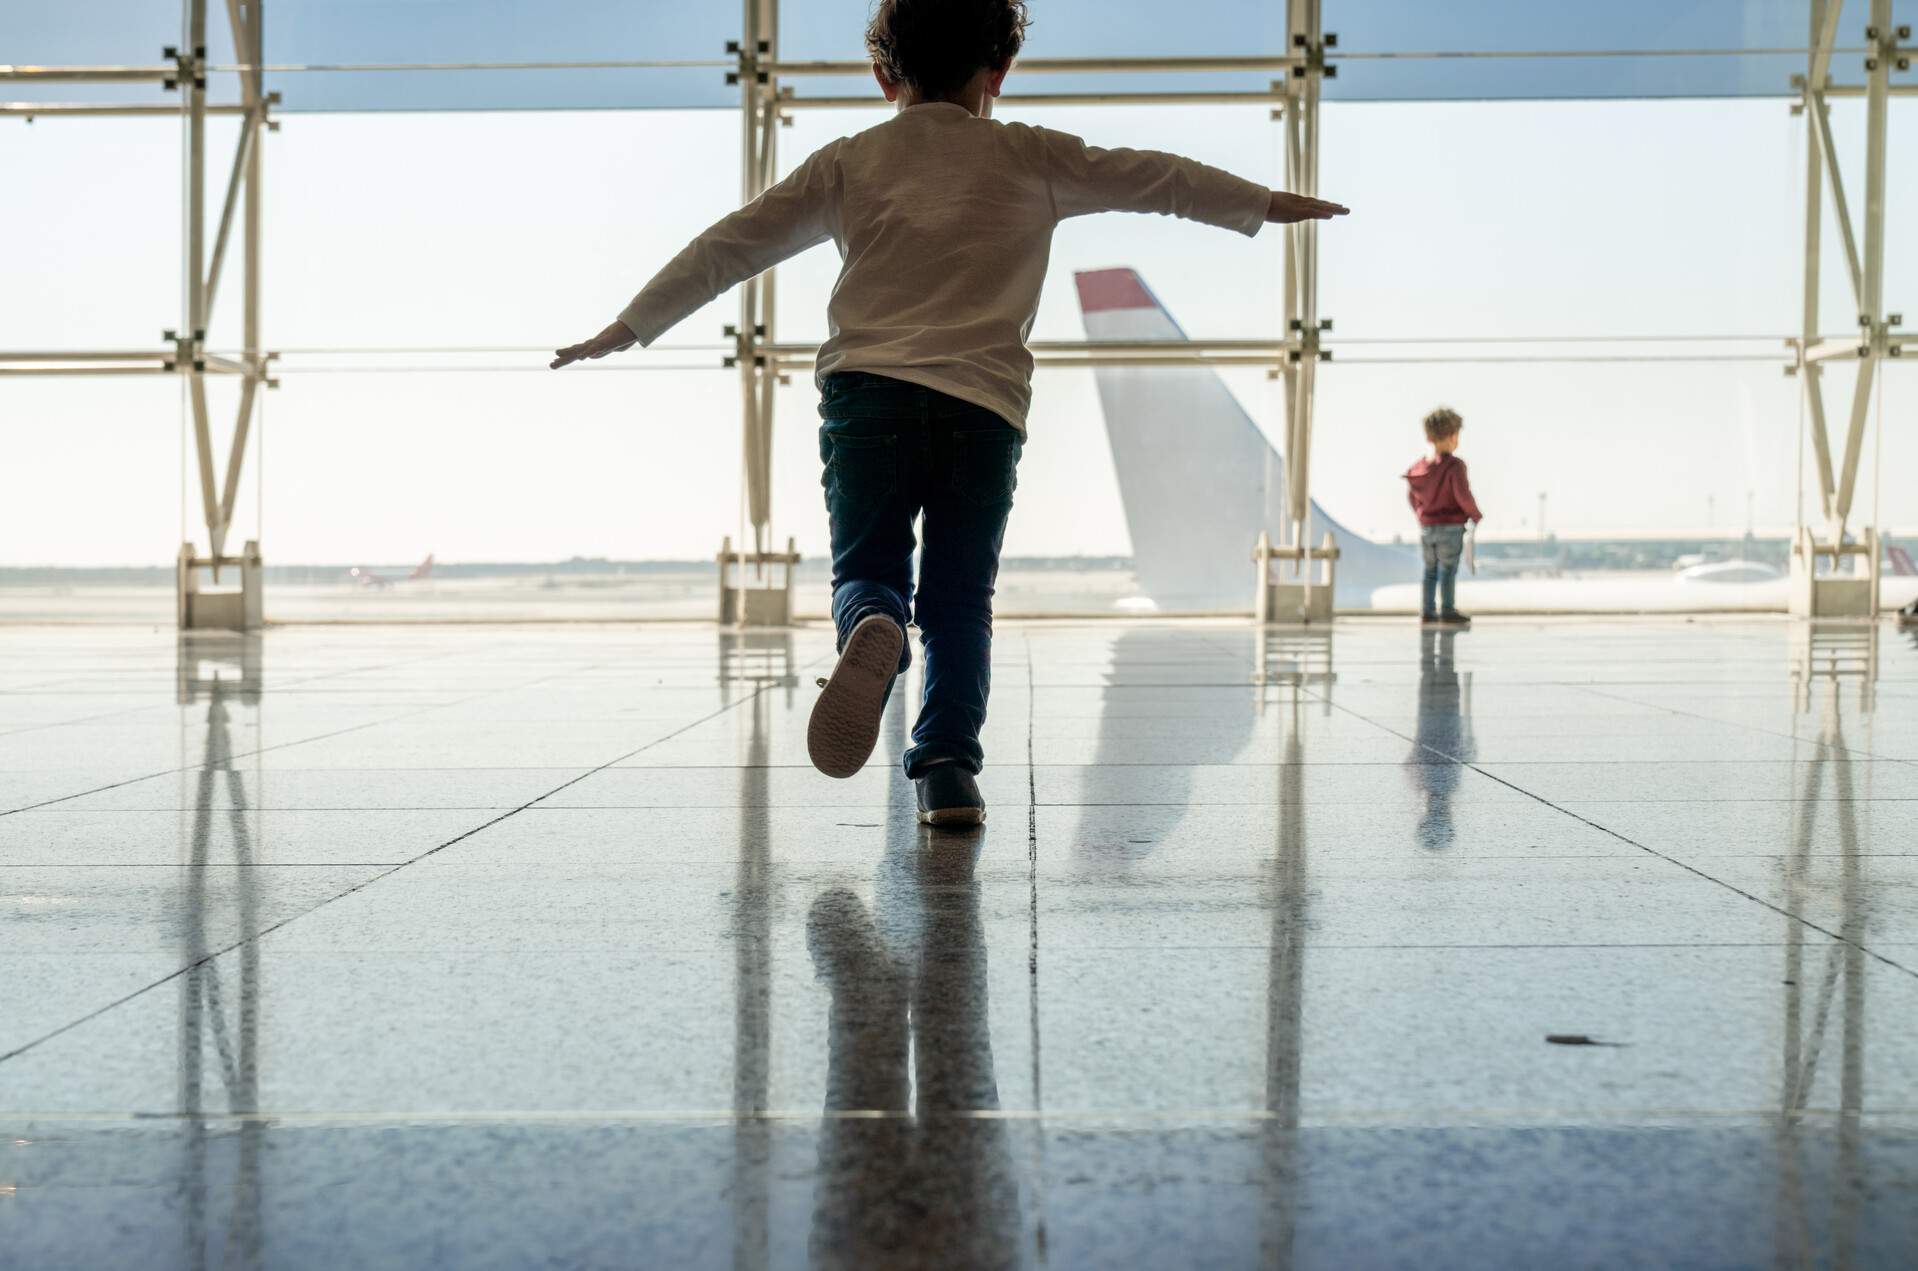 theme_airplane_aircraft_airport_people_kids_boys_gettyimages-1145832731_universal_within-usage-period_91727.jpg